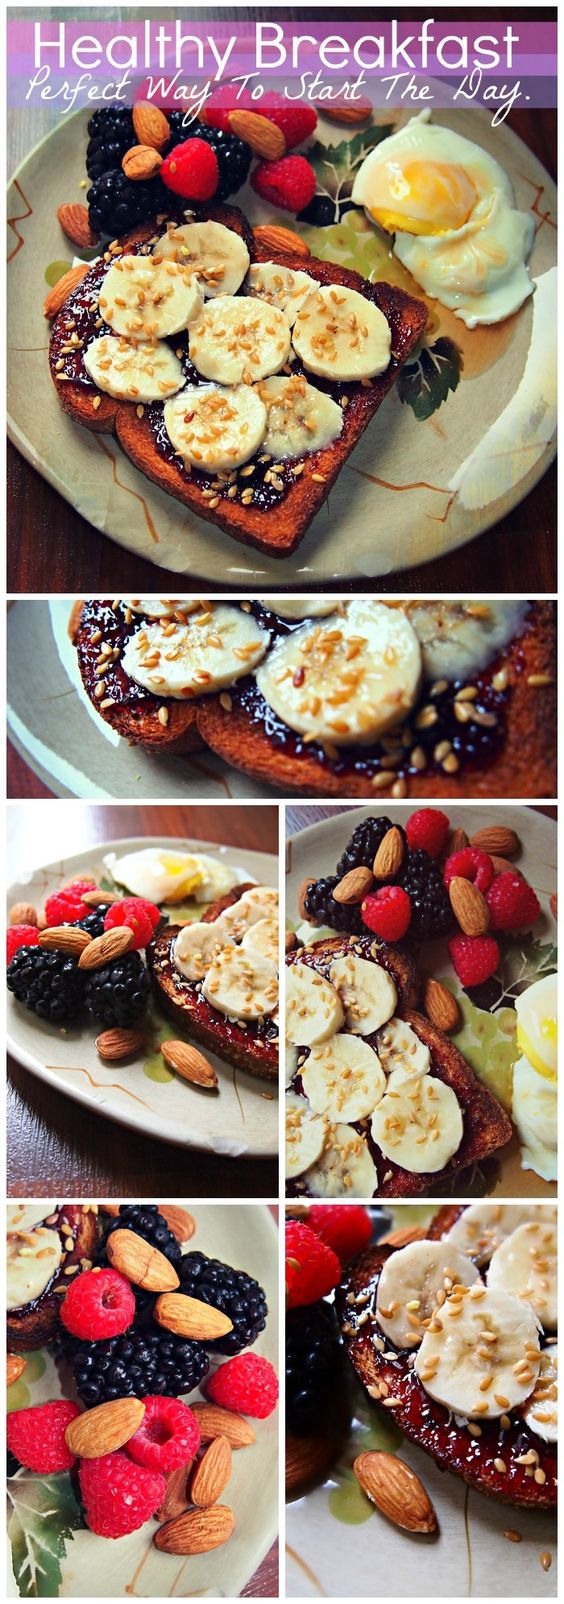 Healthy Breakfast- The Perfect Way To Start The Day